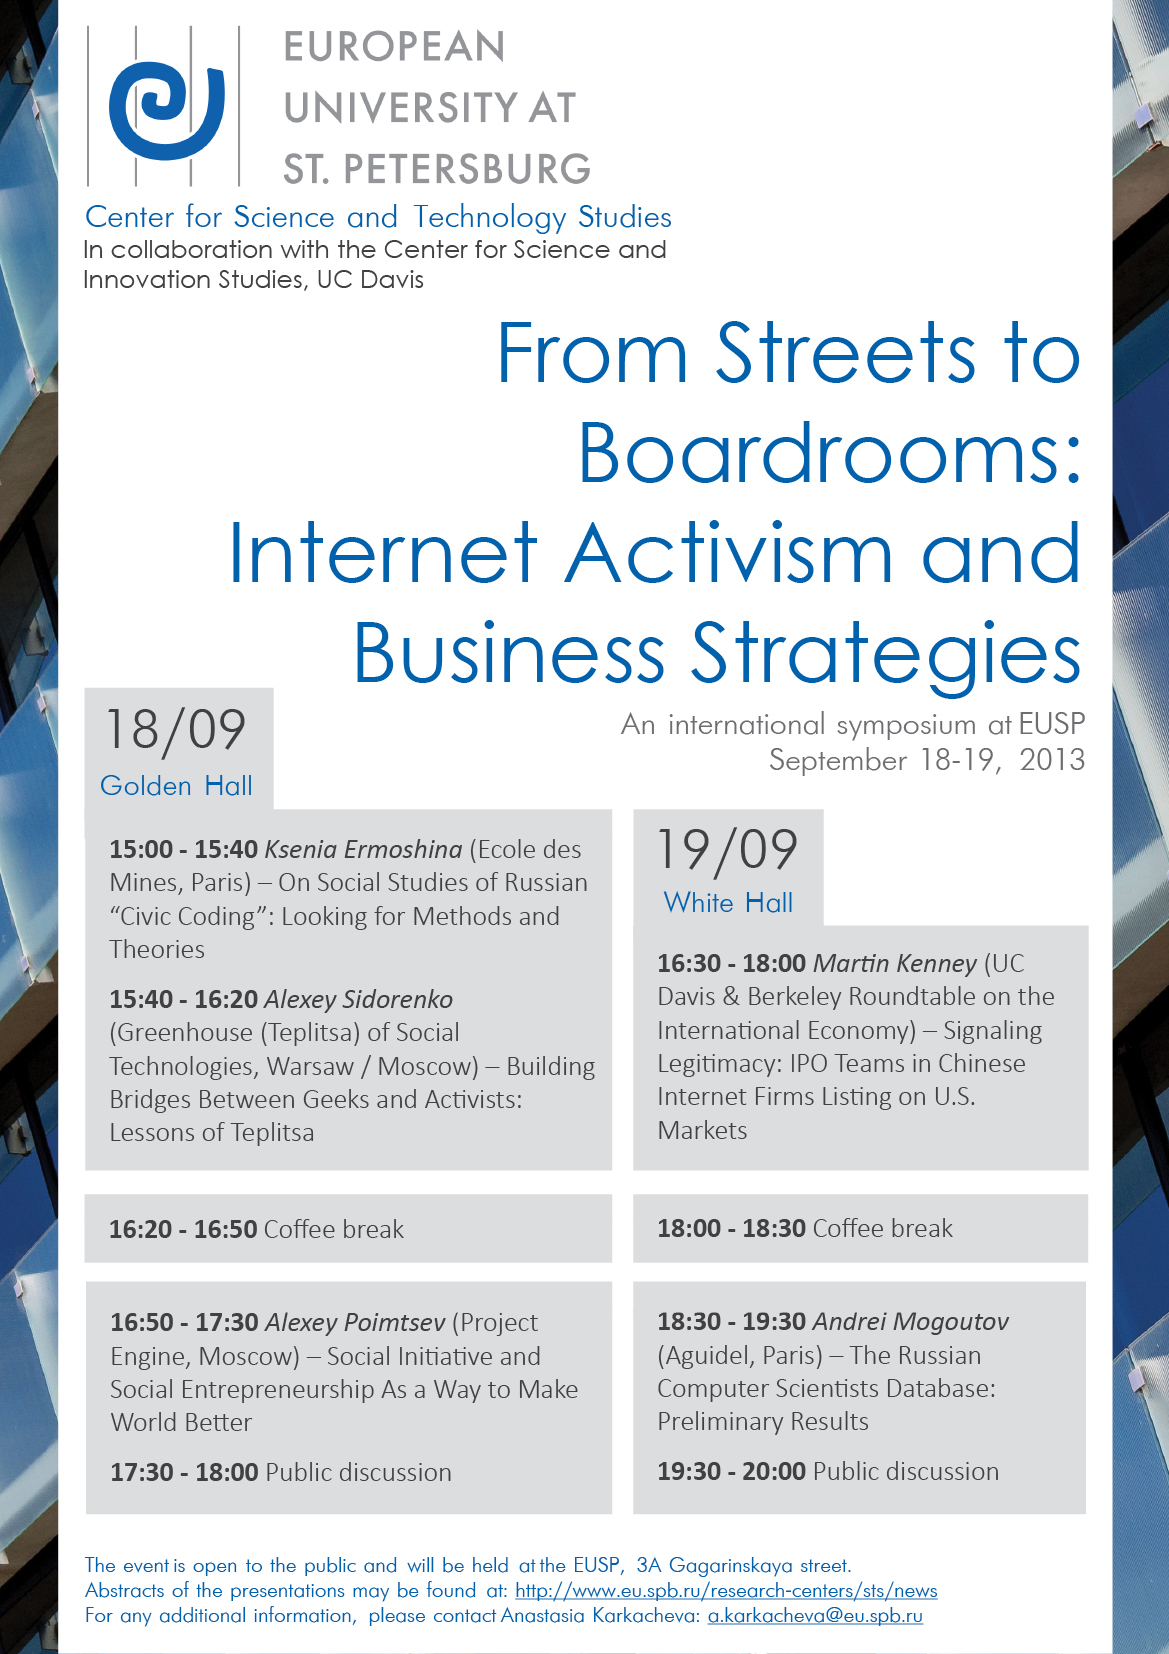 From Streets to Boardrooms STS EUSP 18-19sept